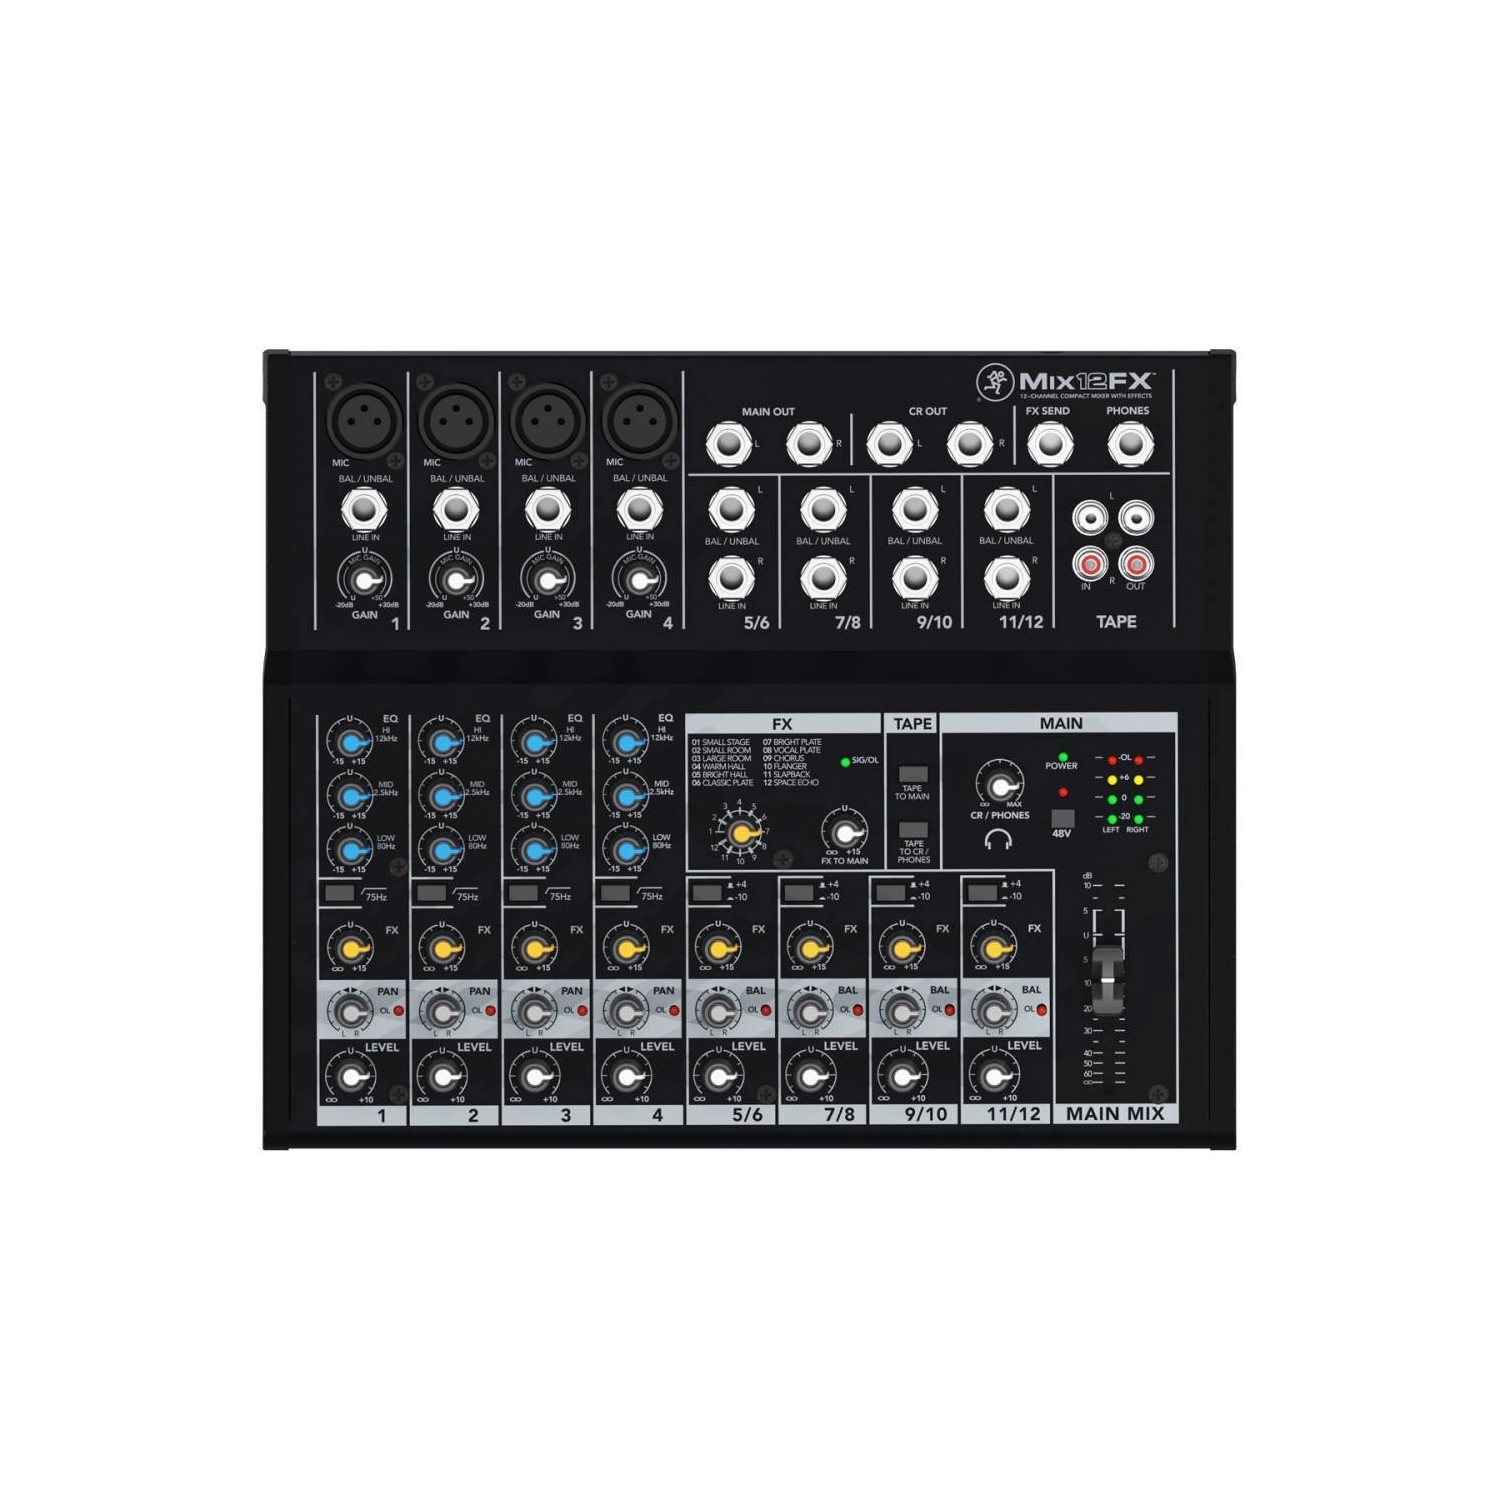 MACKIE - MIX12FX - 12-CHANNEL COMPACT MIXER WITH EFFECTS